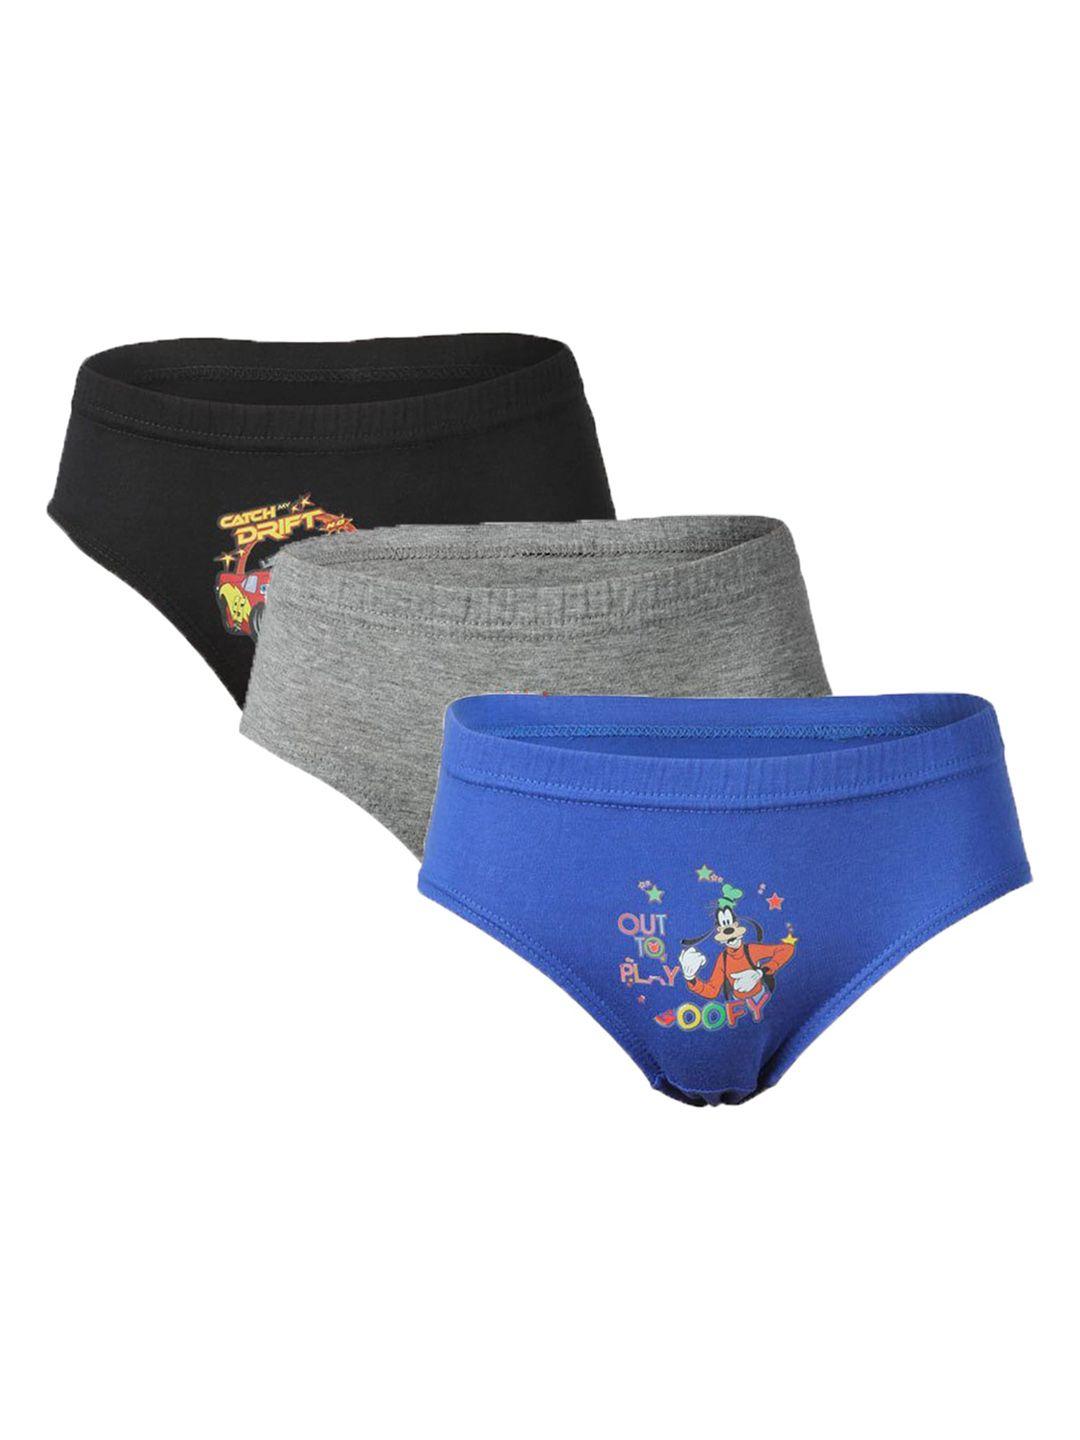 bodycare boys pack of 3 assorted mickey & friends cotton basic briefs